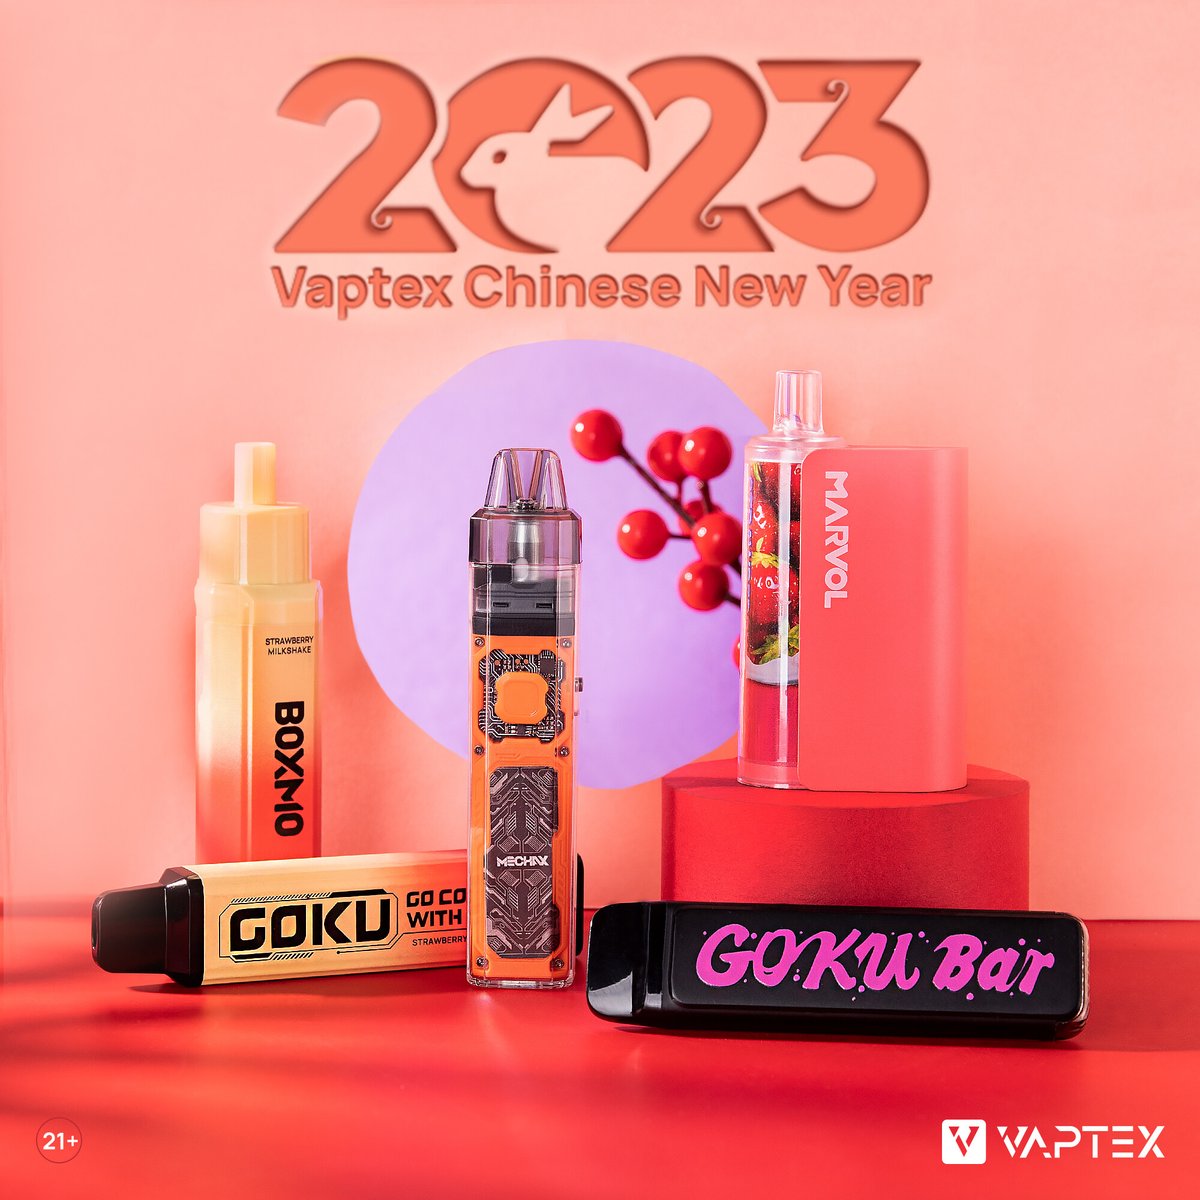 Out with the old smoking habit, in with the new vaping experience. 💗 Here’s to a new year, here’s to you. vaptexworld.com #vaptex #newrelease #pod #vapepen #mtl #vapelife #vapefam #ecigs